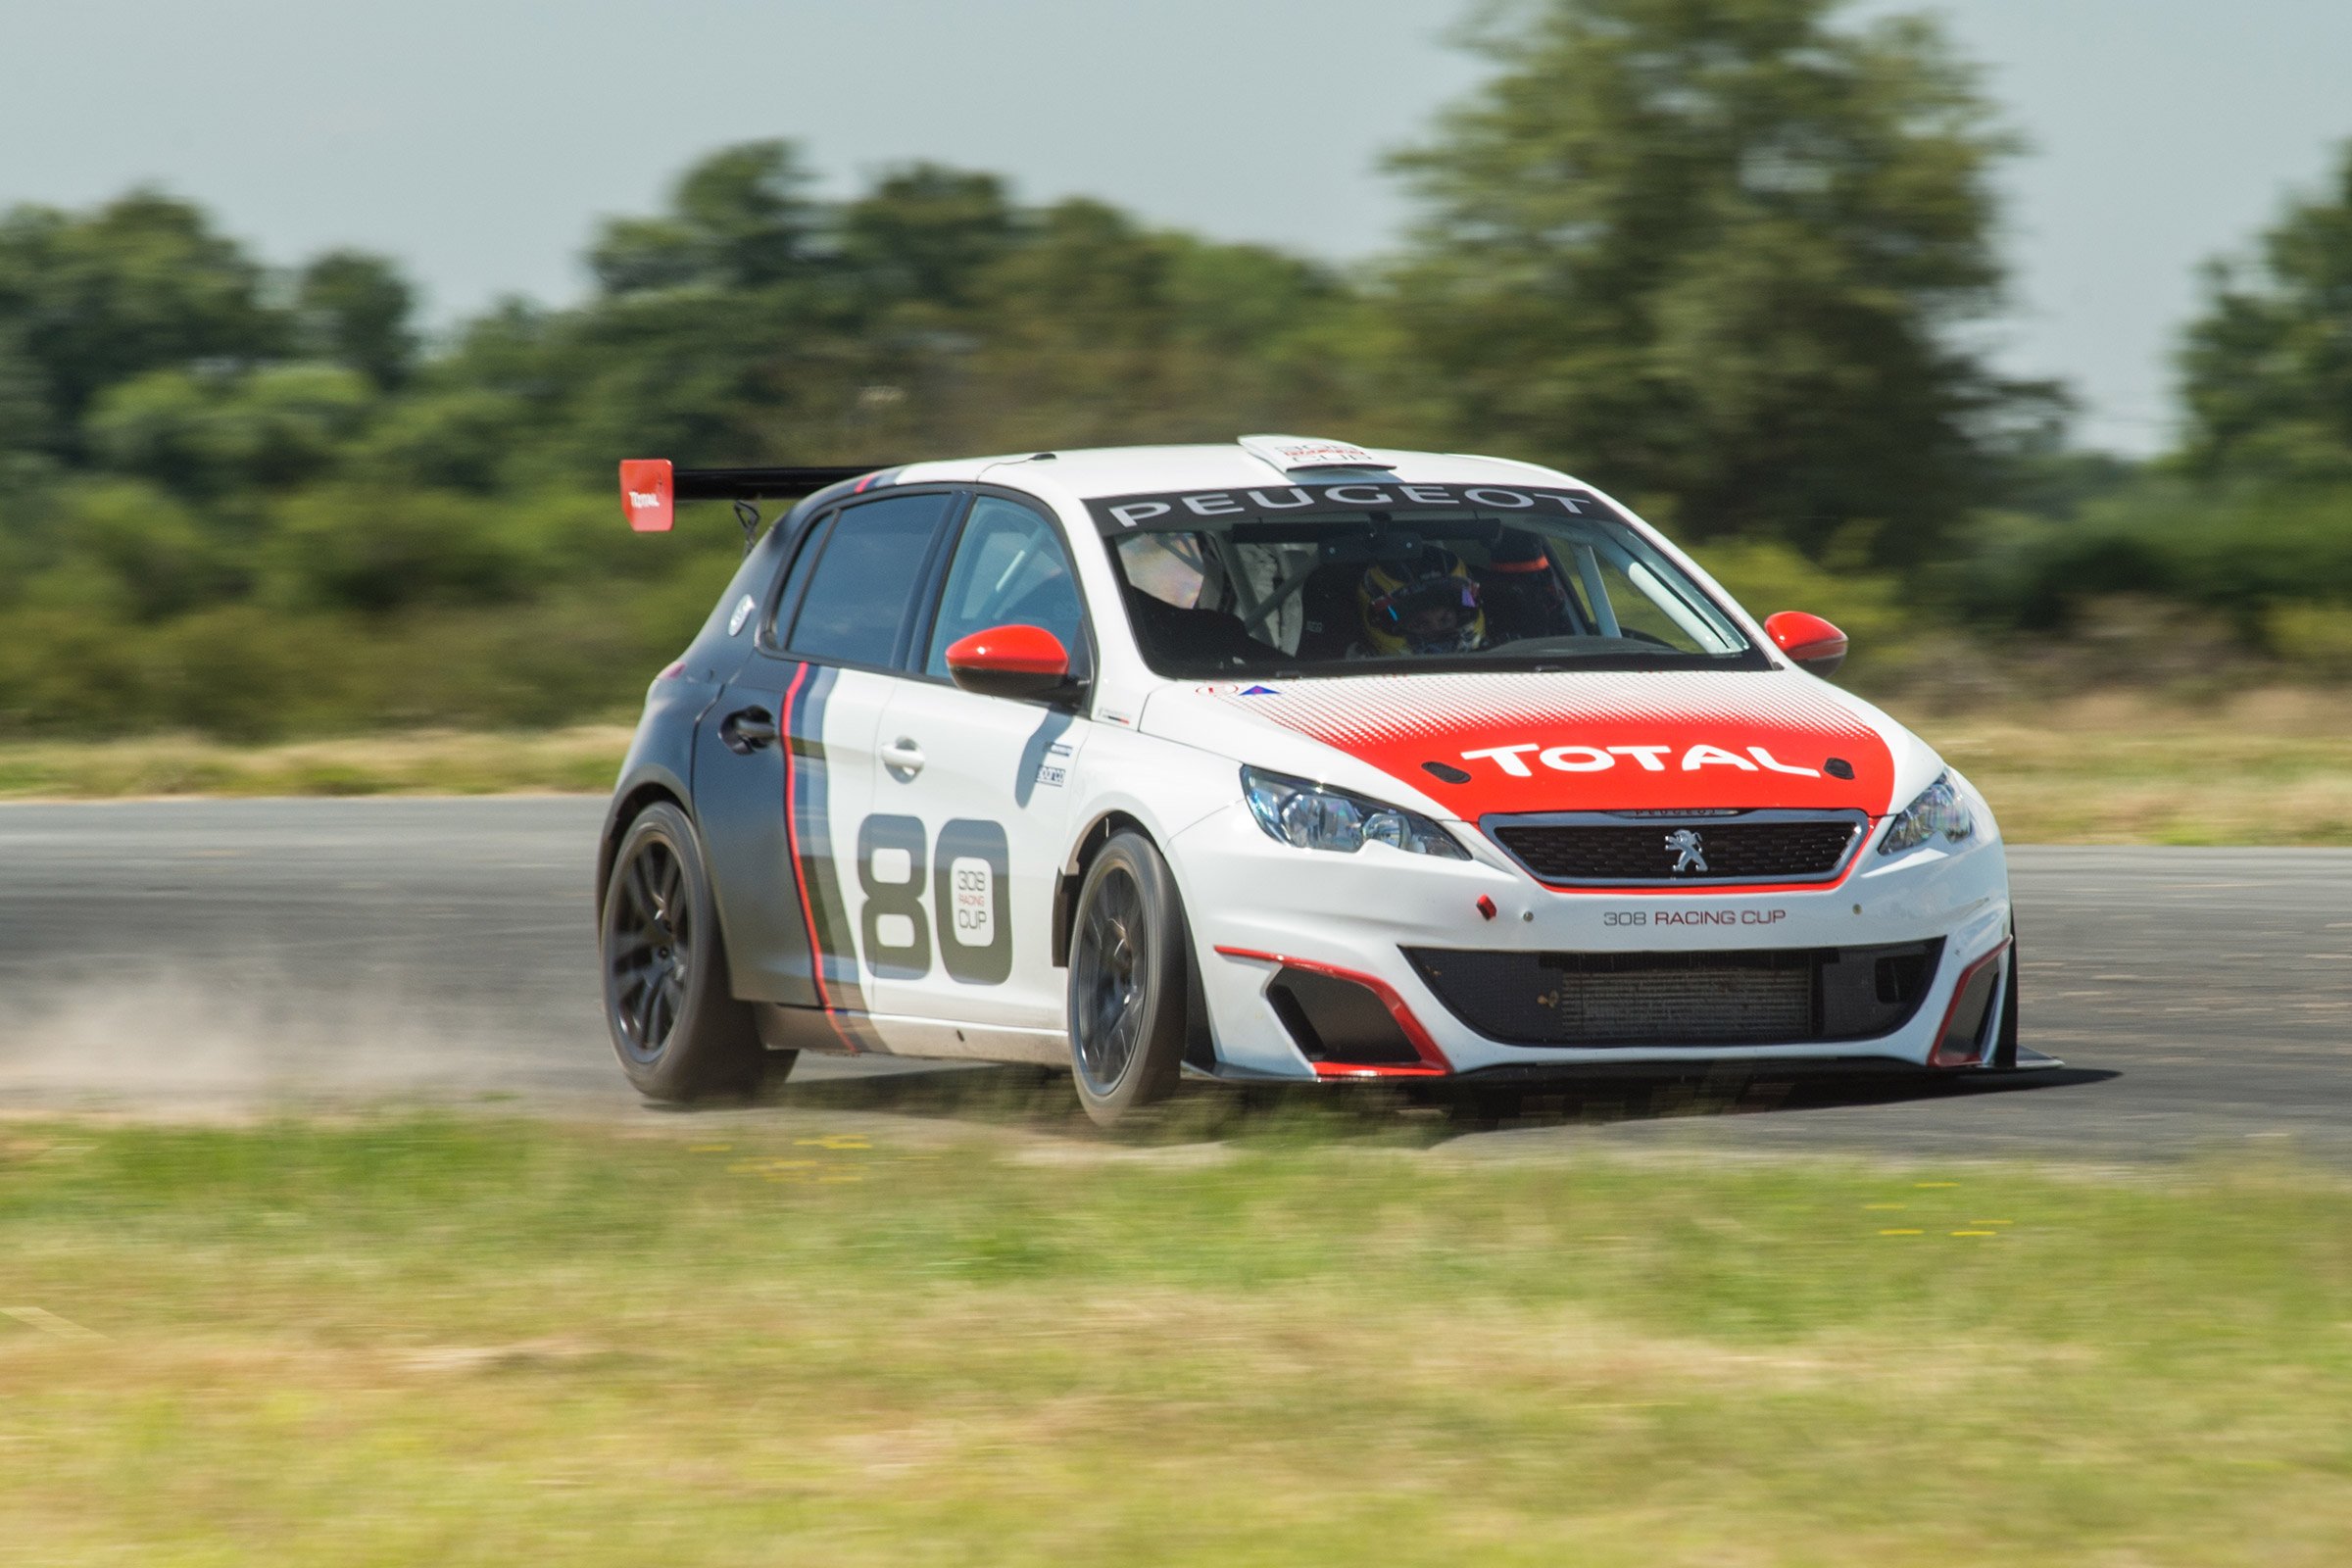 peugeot, 308, Racing, Cup,  t9 , Cars, Racecars, French, 2016 Wallpaper